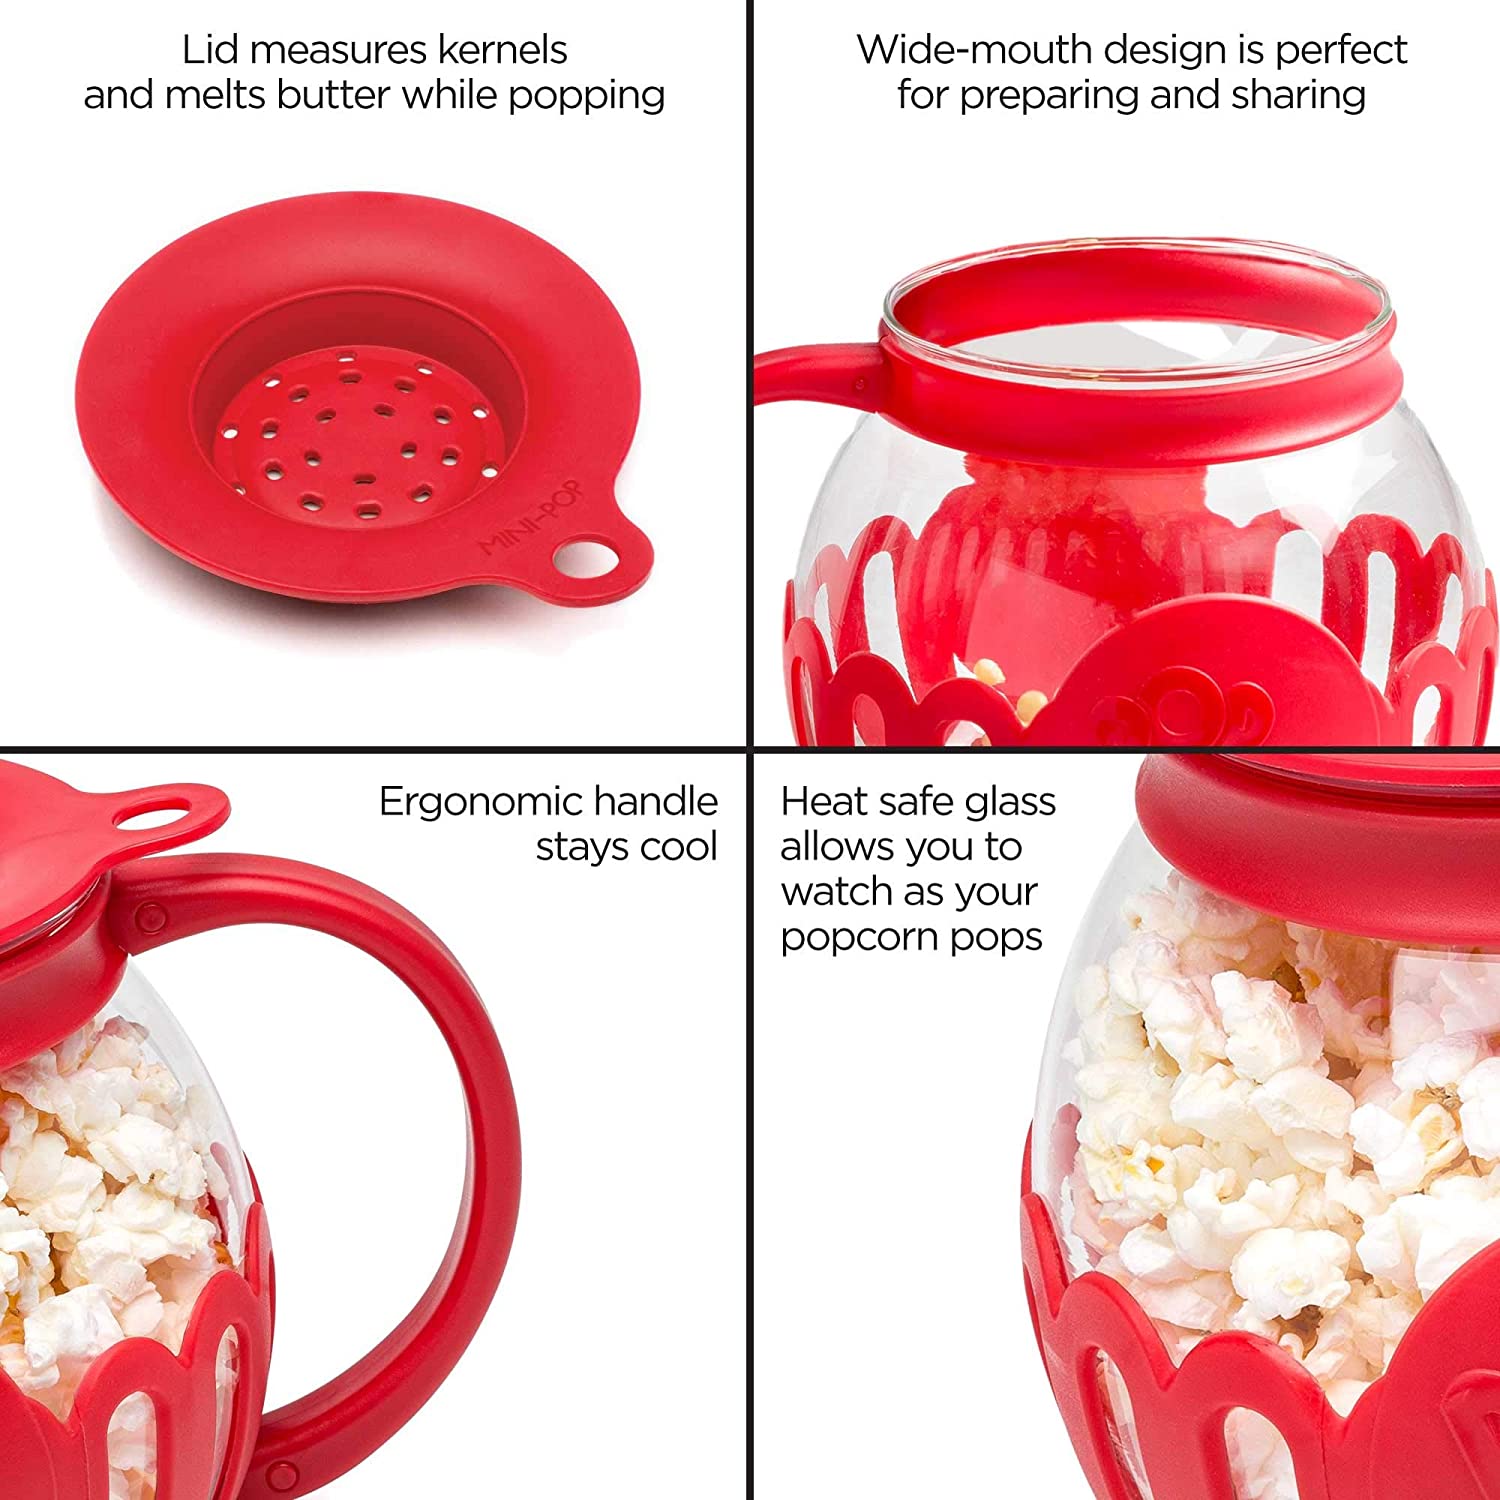  The Original Korcci 3 Quart Microwave Glass Popcorn Popper,  Borosilicate Glass, Dishwasher Safe, 3-in-1 Silicone Lid, BPA Free, Family  Size (Red): Home & Kitchen